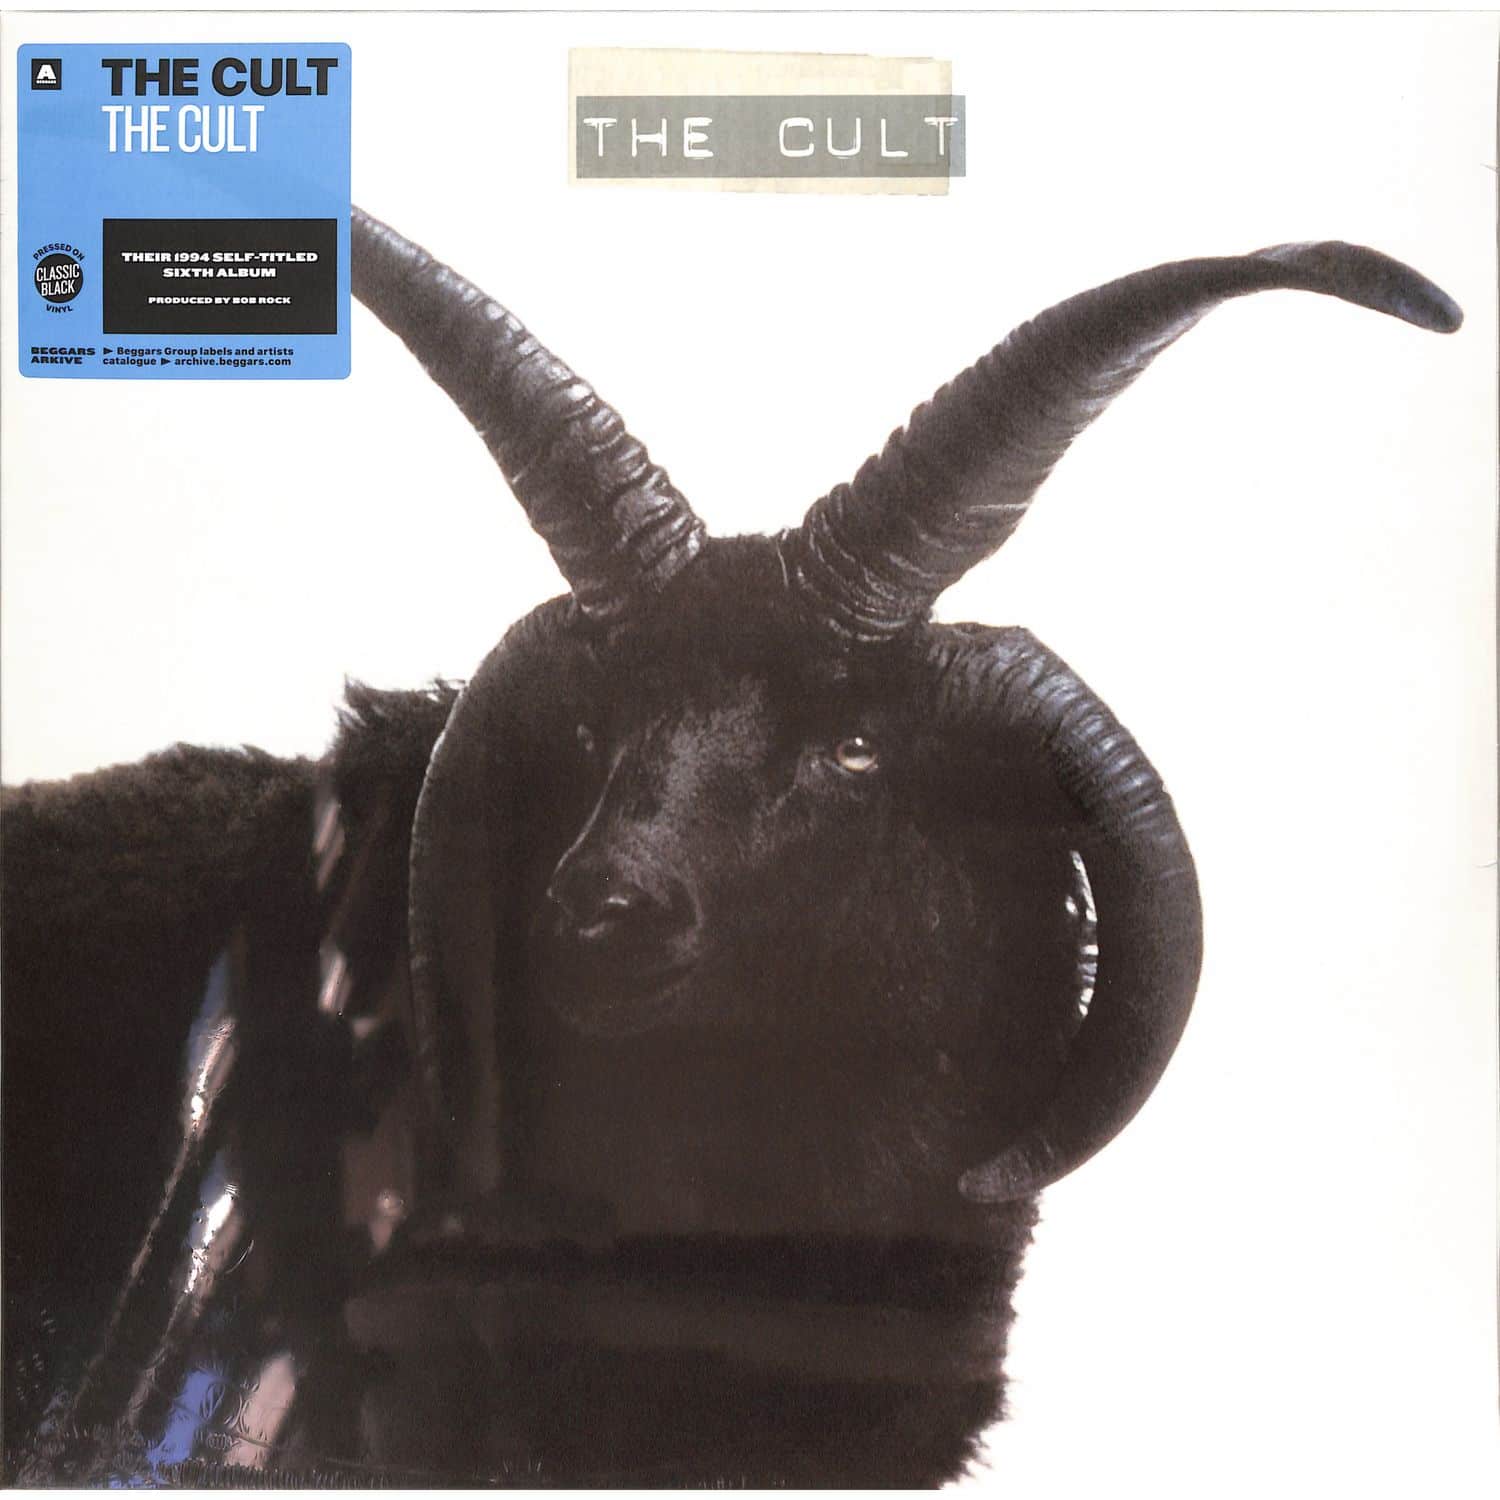 The Cult - THE CULT 